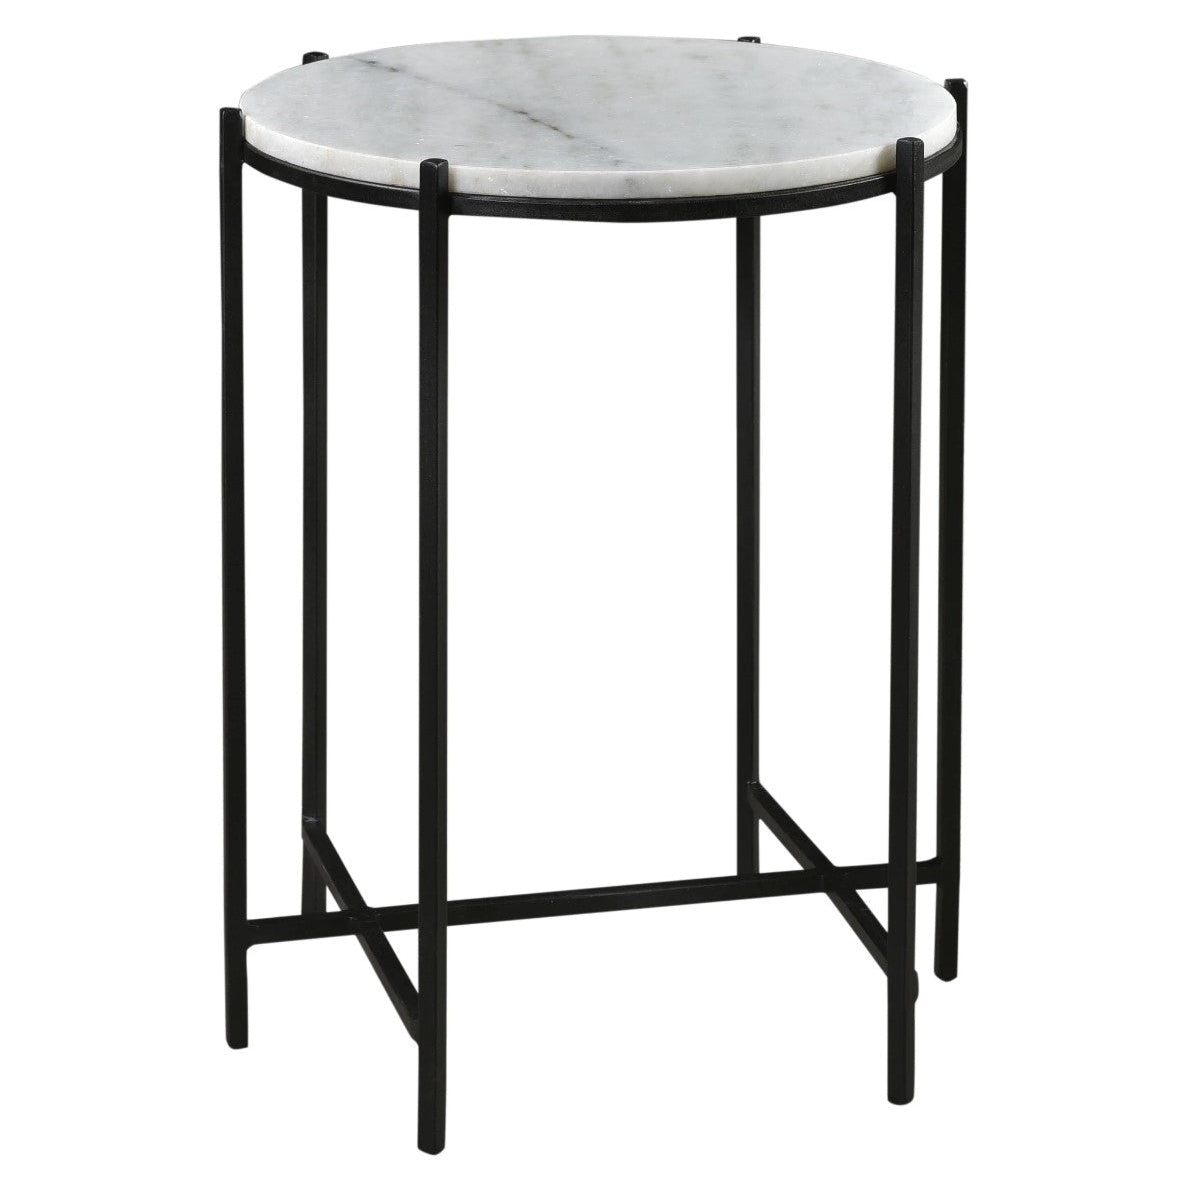 Crestview Collection Bengal Manor 17" x 17" x 22" Modern Iron And Marble Accent Table In Black and White Finish